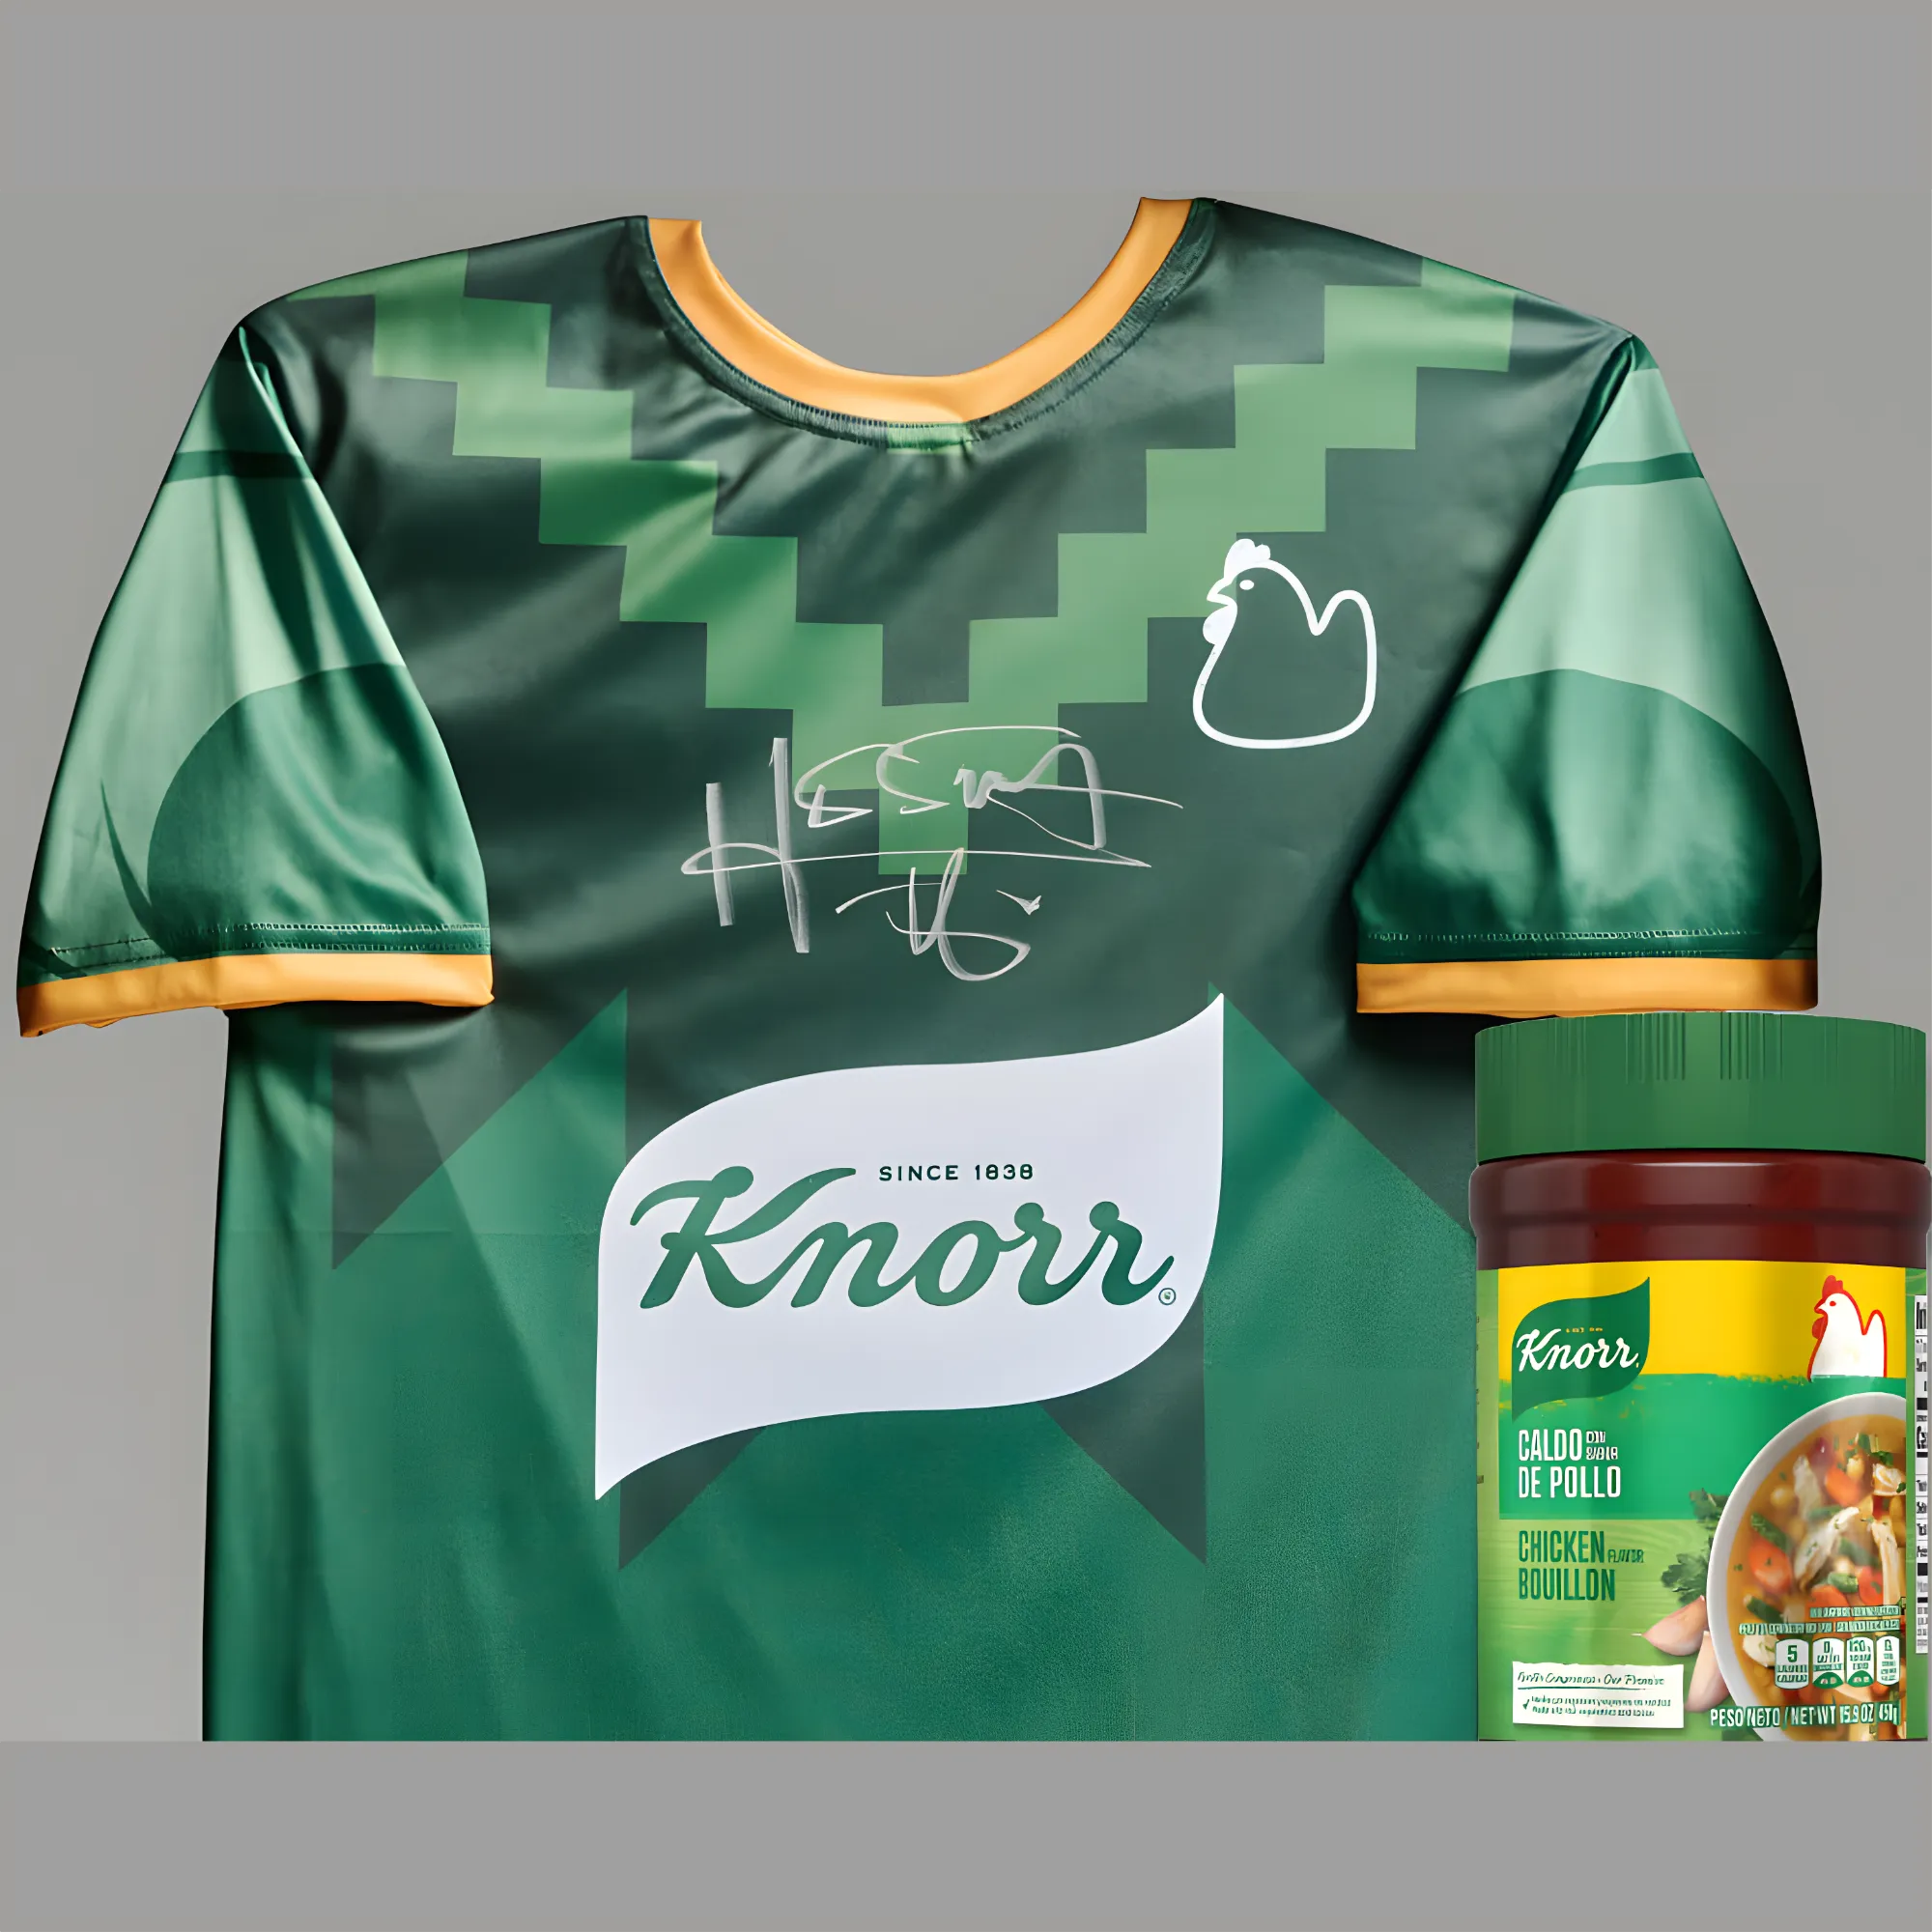 Free Knorr T-Shirt For Winners